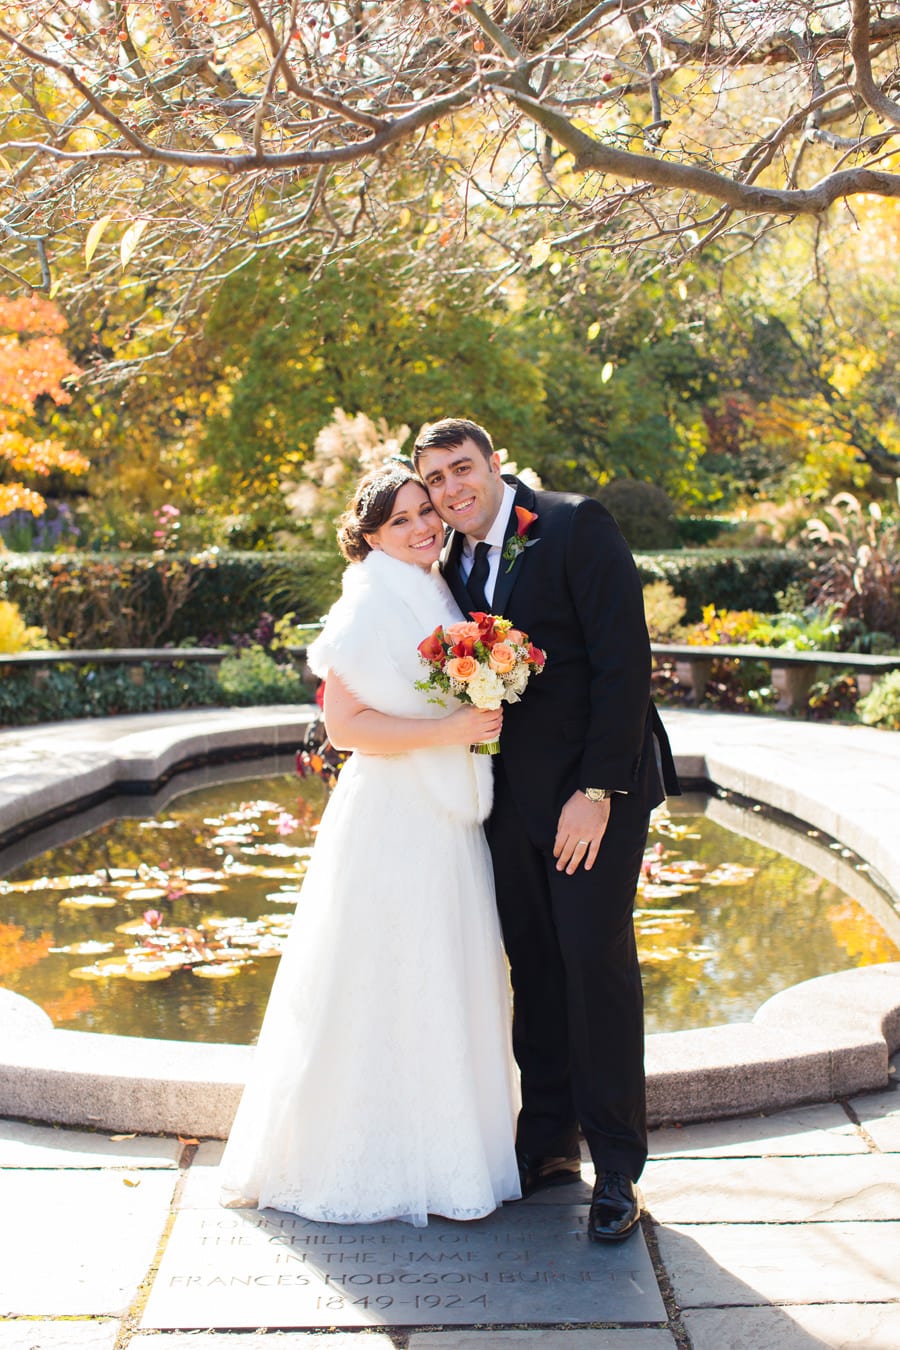 029-central-park-nyc-wedding-photography